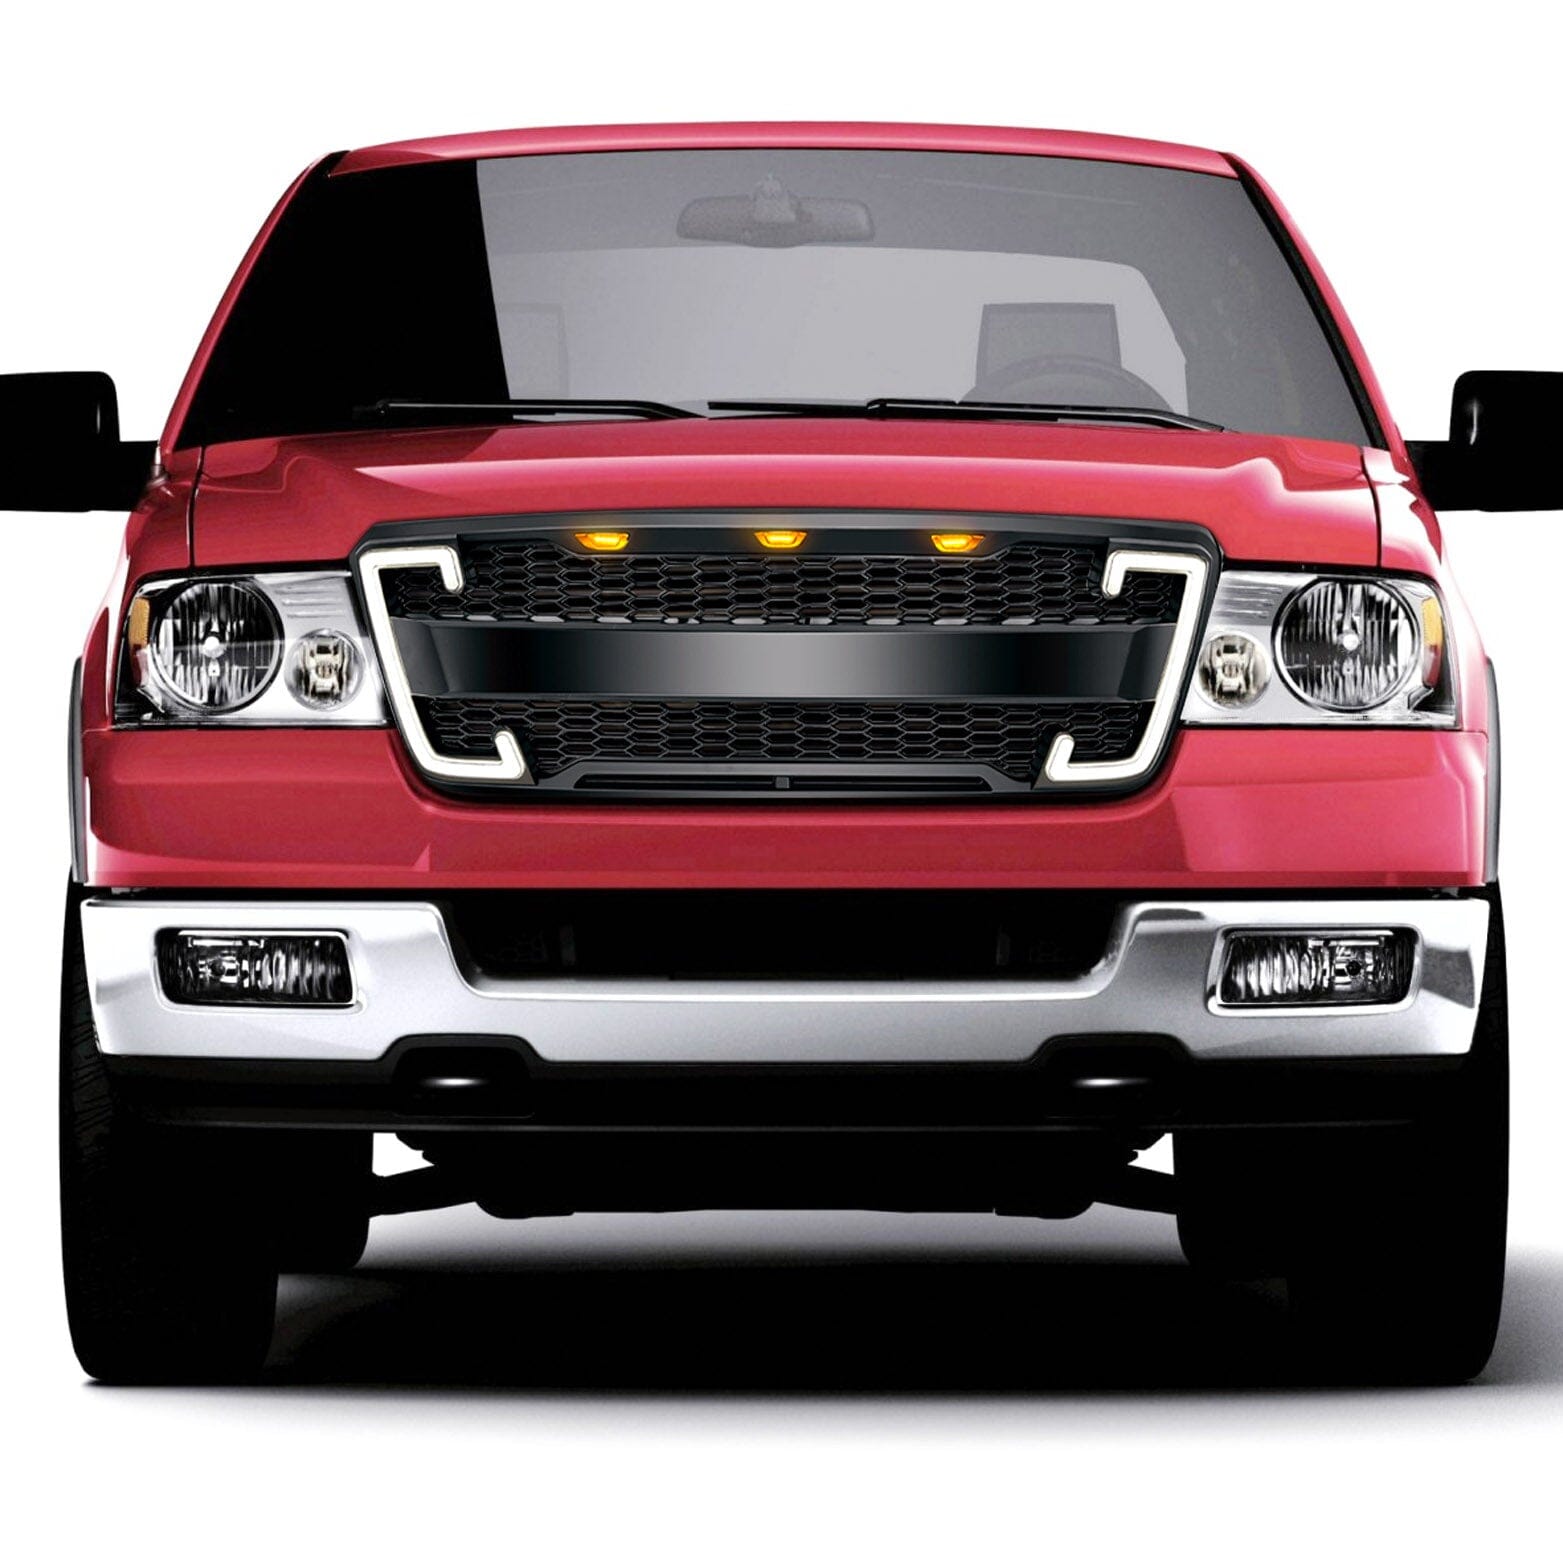 Raptor Style Mesh Grille WDRL & Turn Signal Lights For 2004-2008 Ford F150 